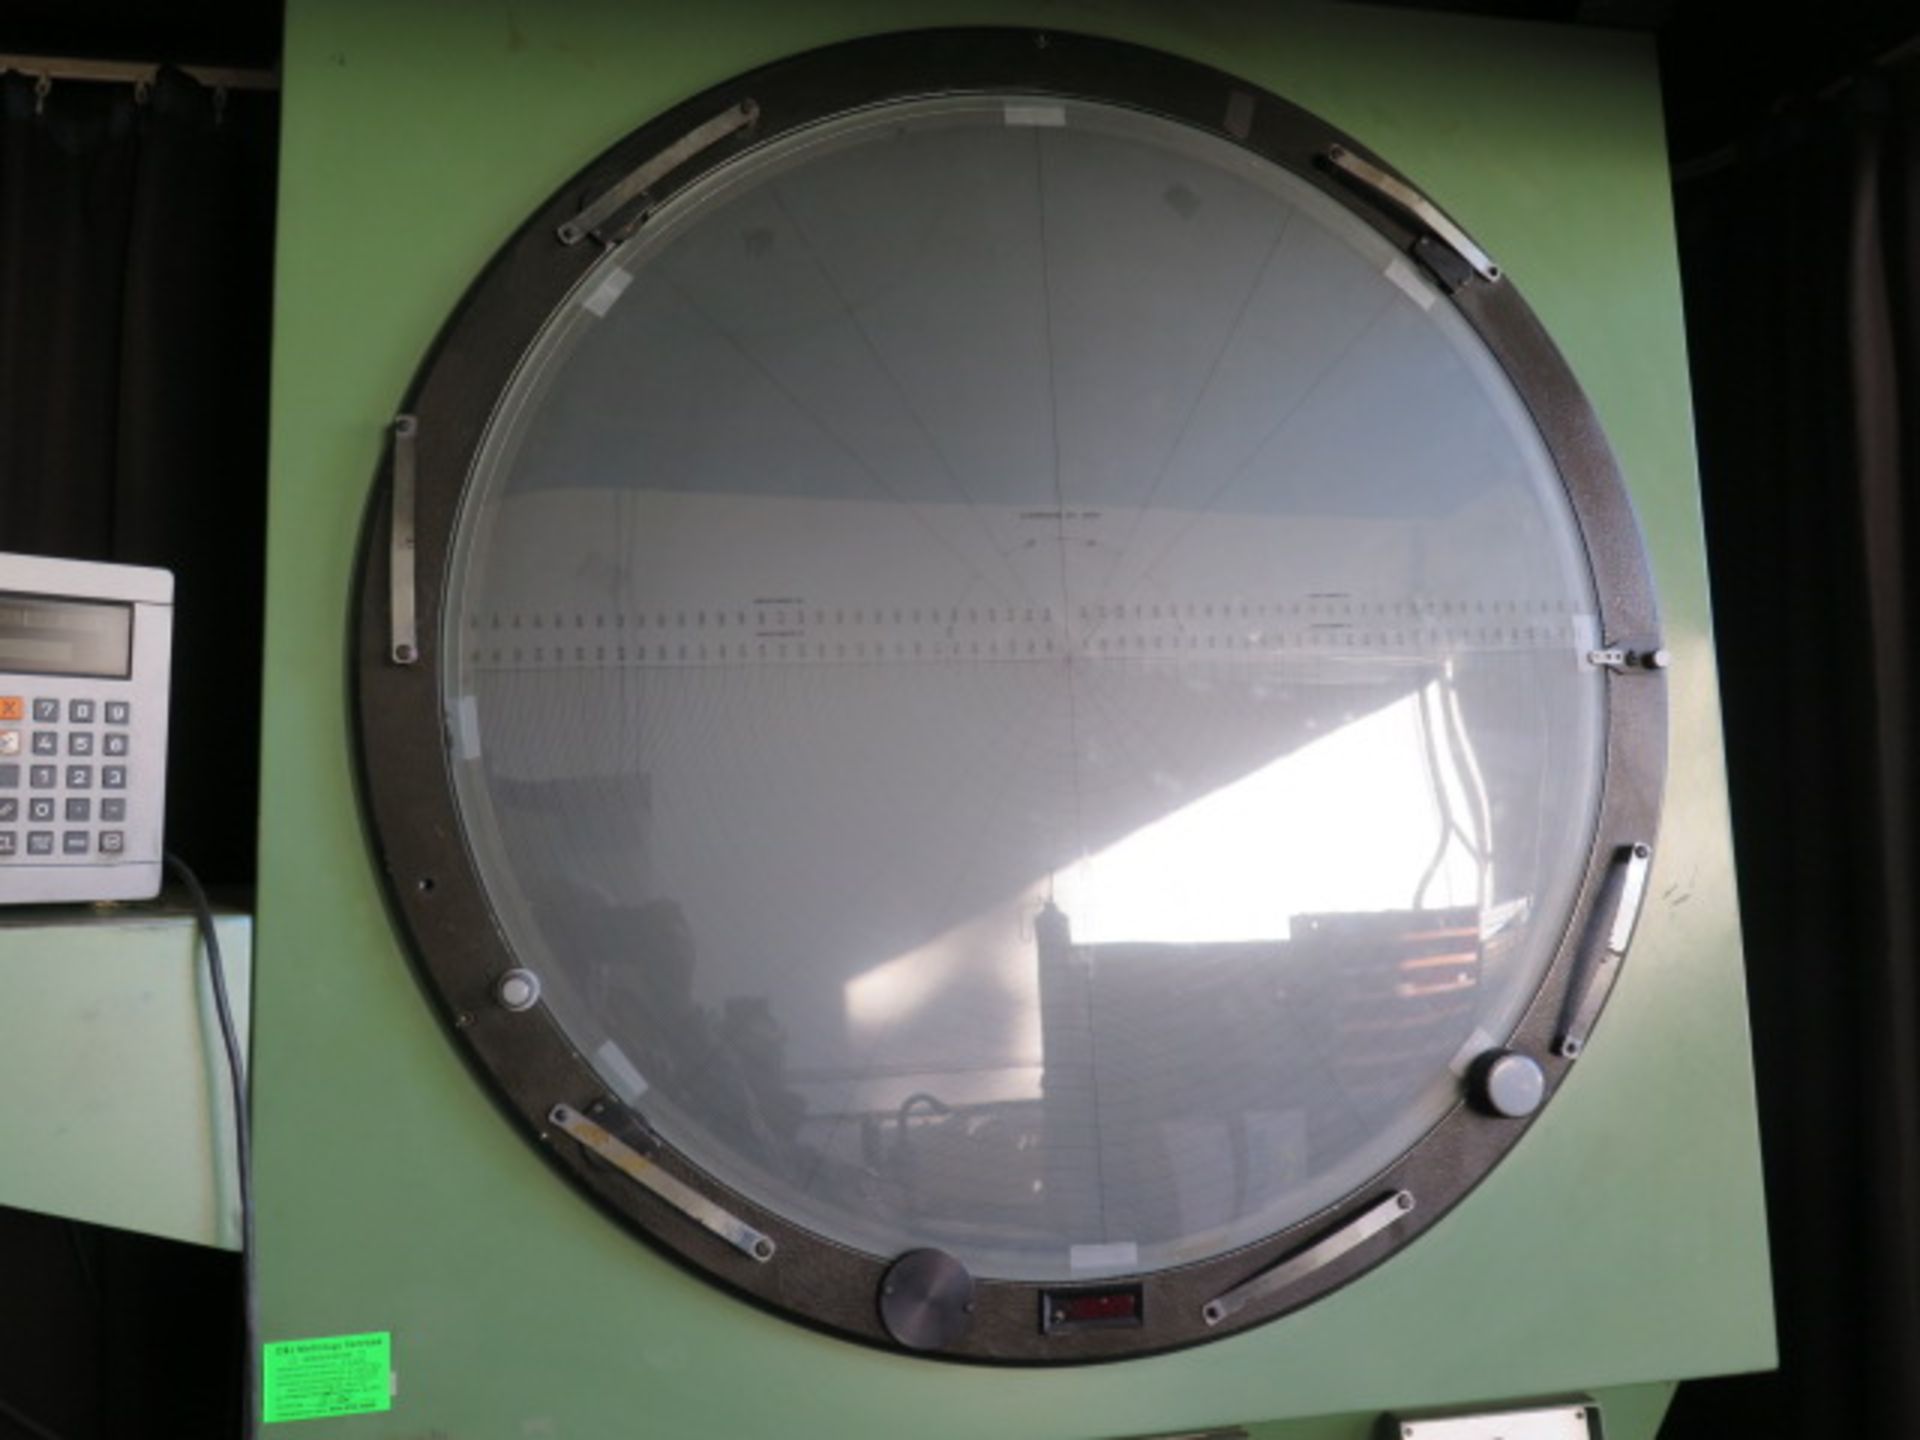 Deltronic 750H Floor Model Optical Comparator w/ Heidenhain DRO, Digital Angular Readout, SOLD AS IS - Image 6 of 15